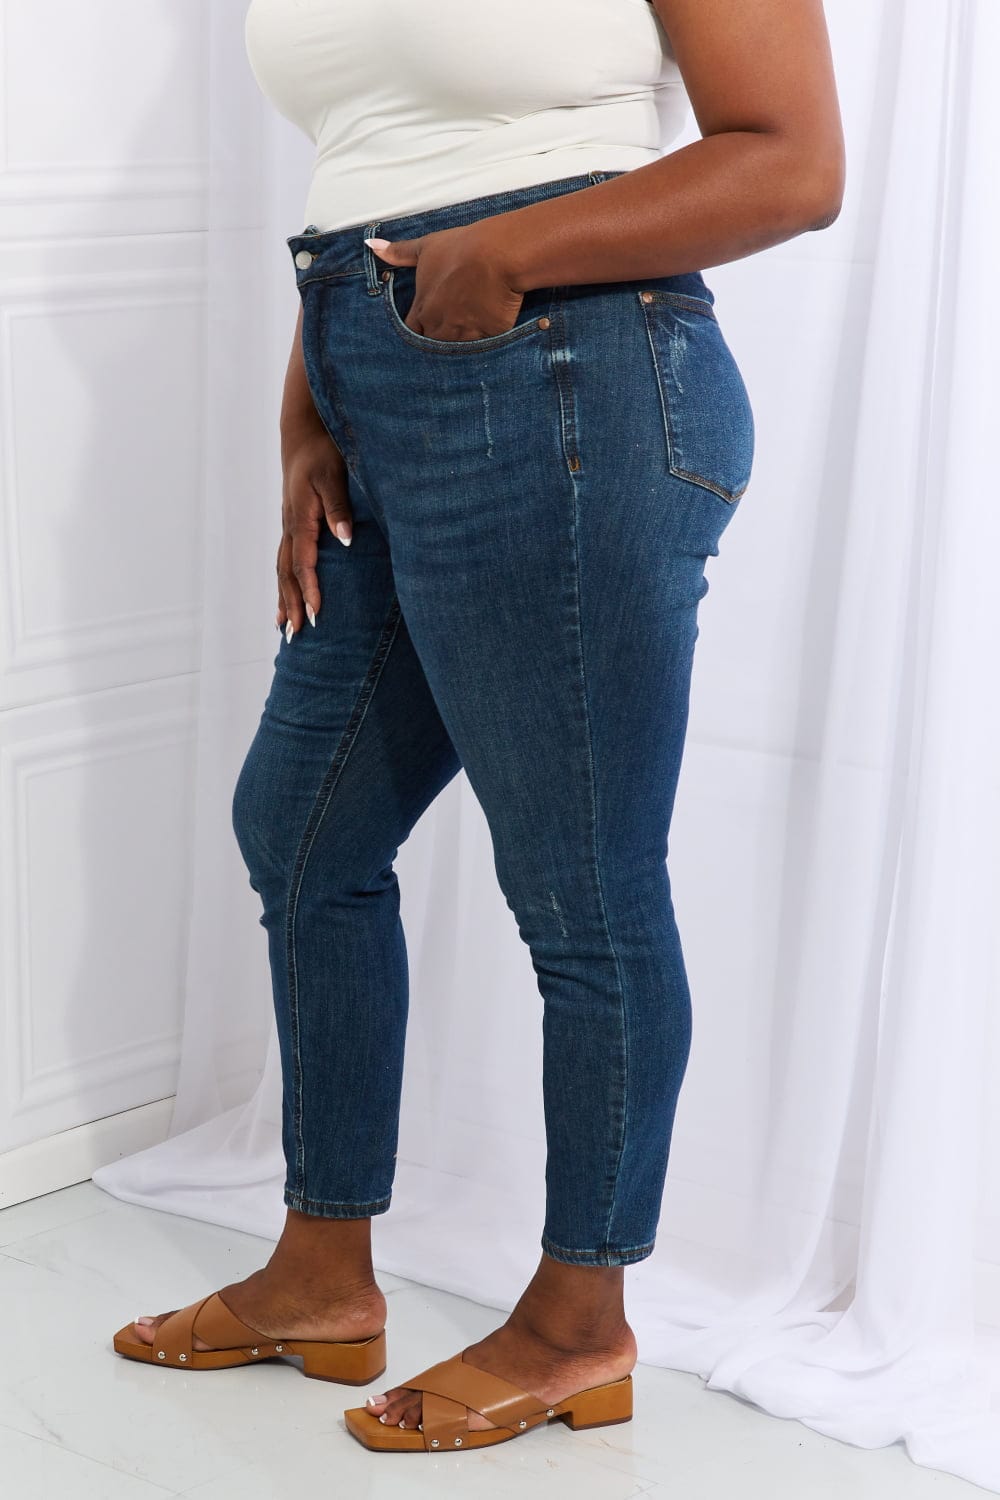 Judy Blue Emily Full Size High Waisted Tummy Control Skinny Jeans